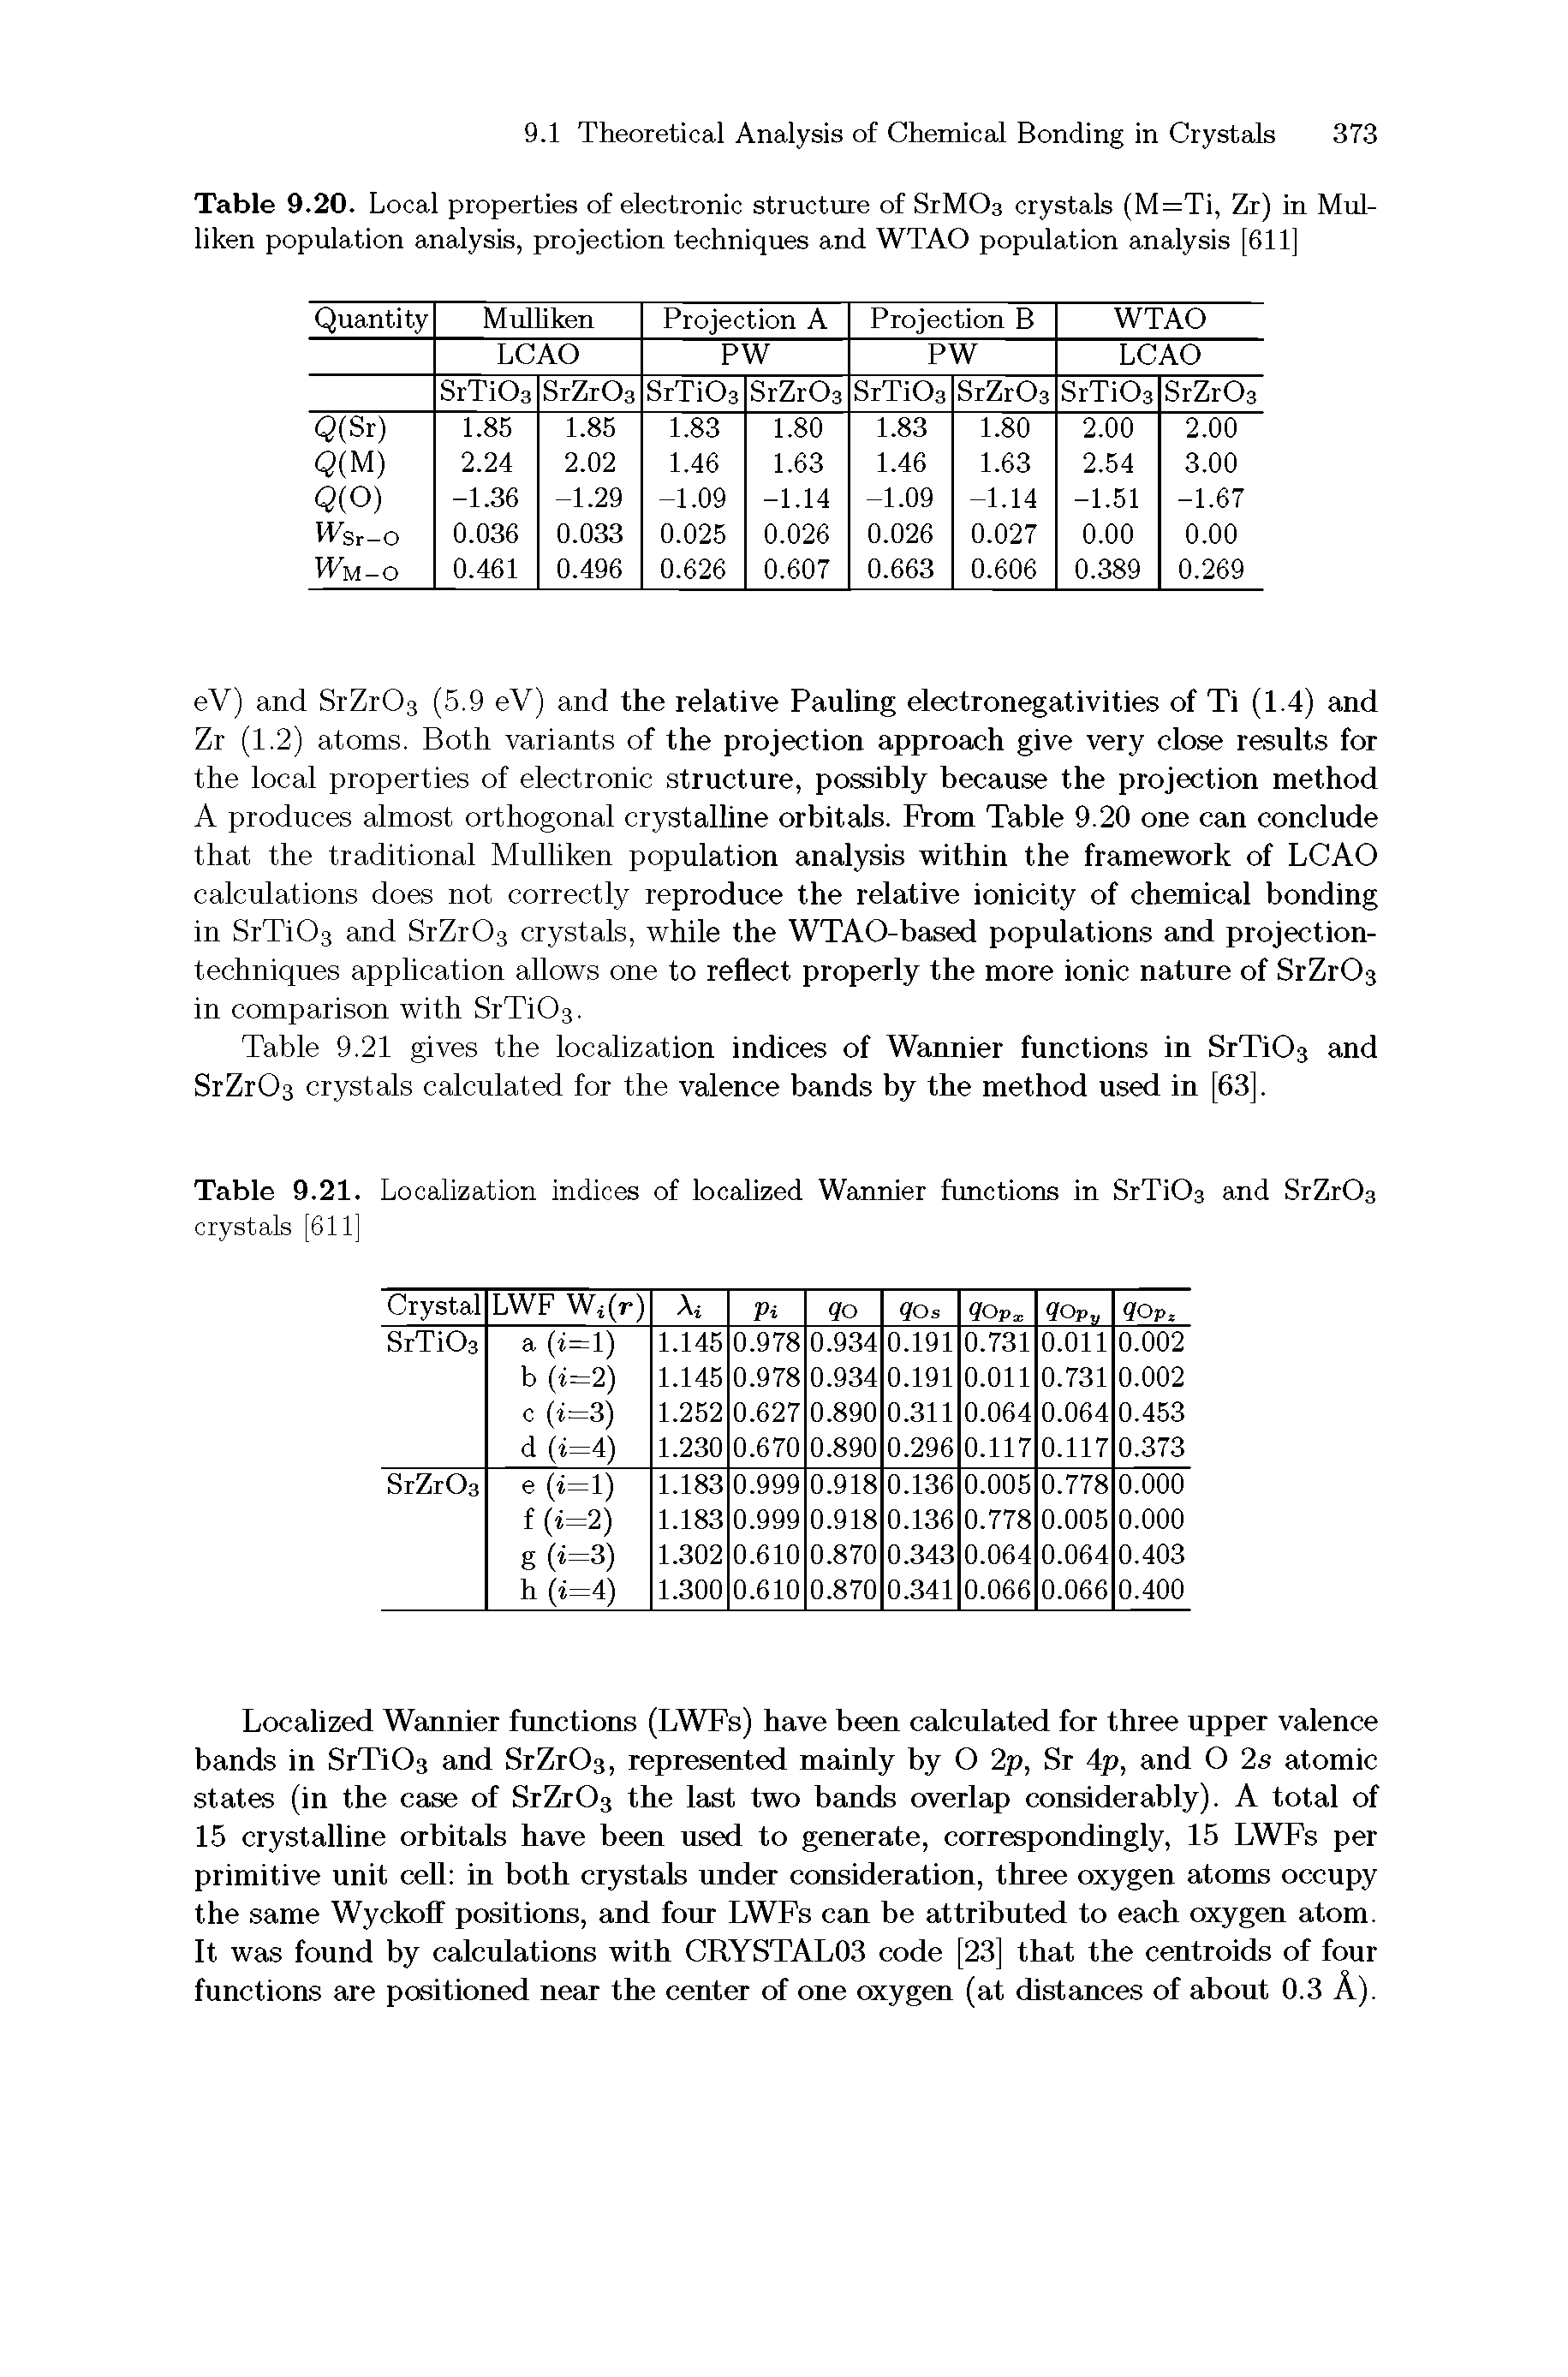 Table 9.20. Local properties of electronic structure of SrMOa crystals (M=Ti, Zr) in Mul-liken population analysis, projection techniques and WTAO population analysis [611]...